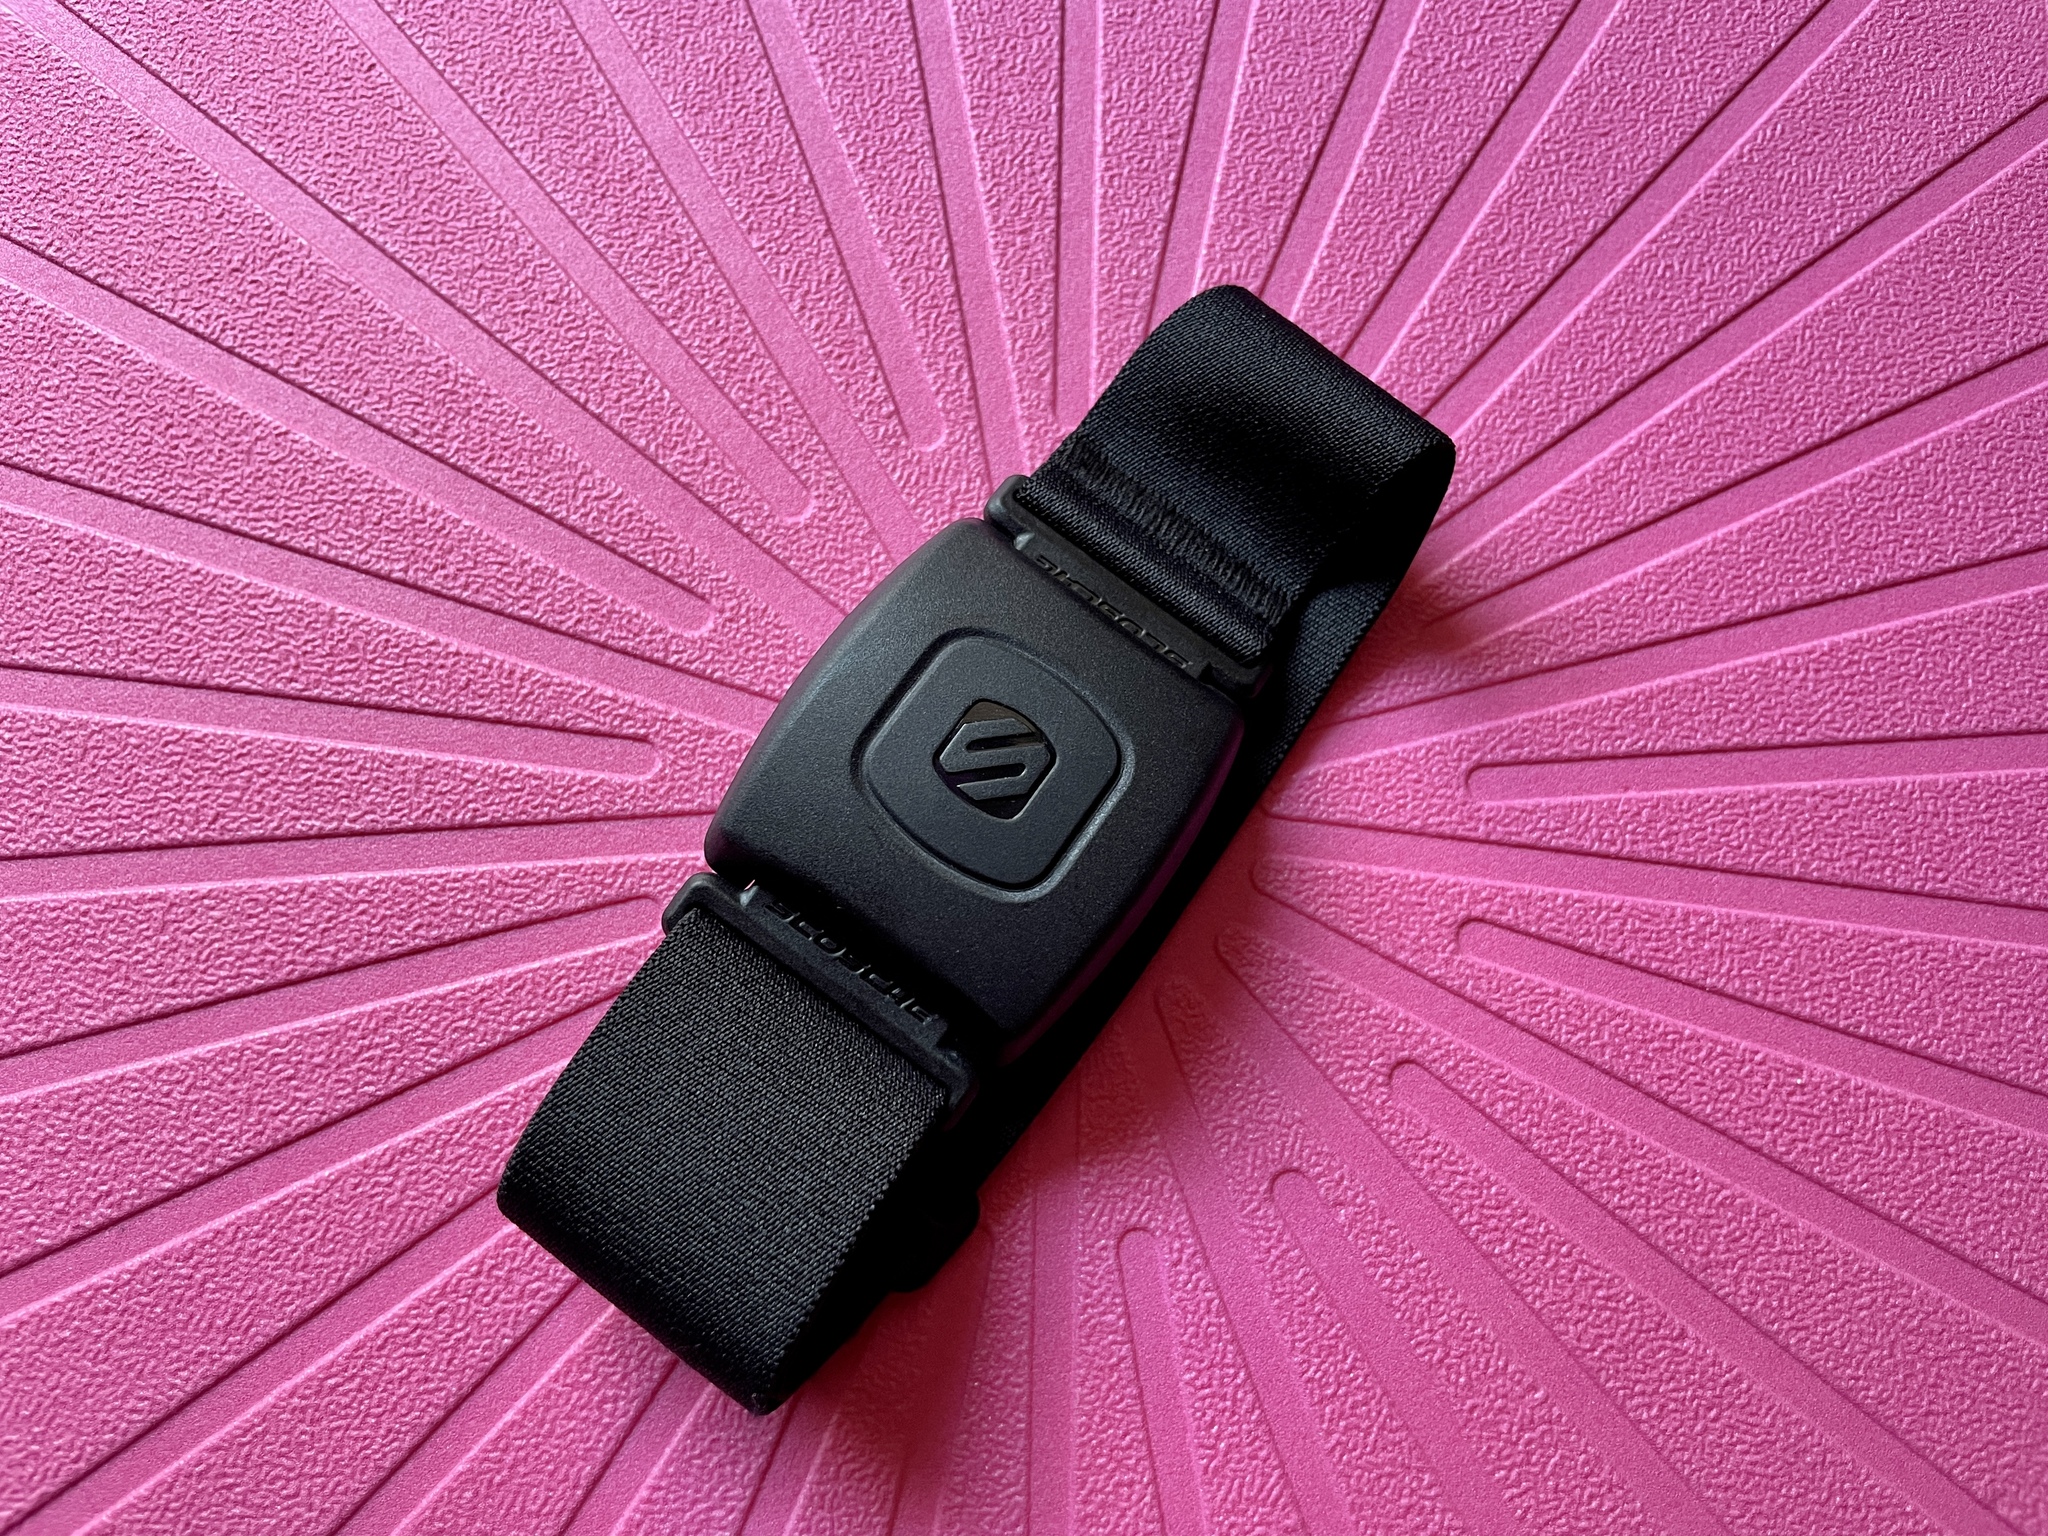 Scosche Rhythm Plus 2.0 Heart Rate Monitor Armband review: Great 